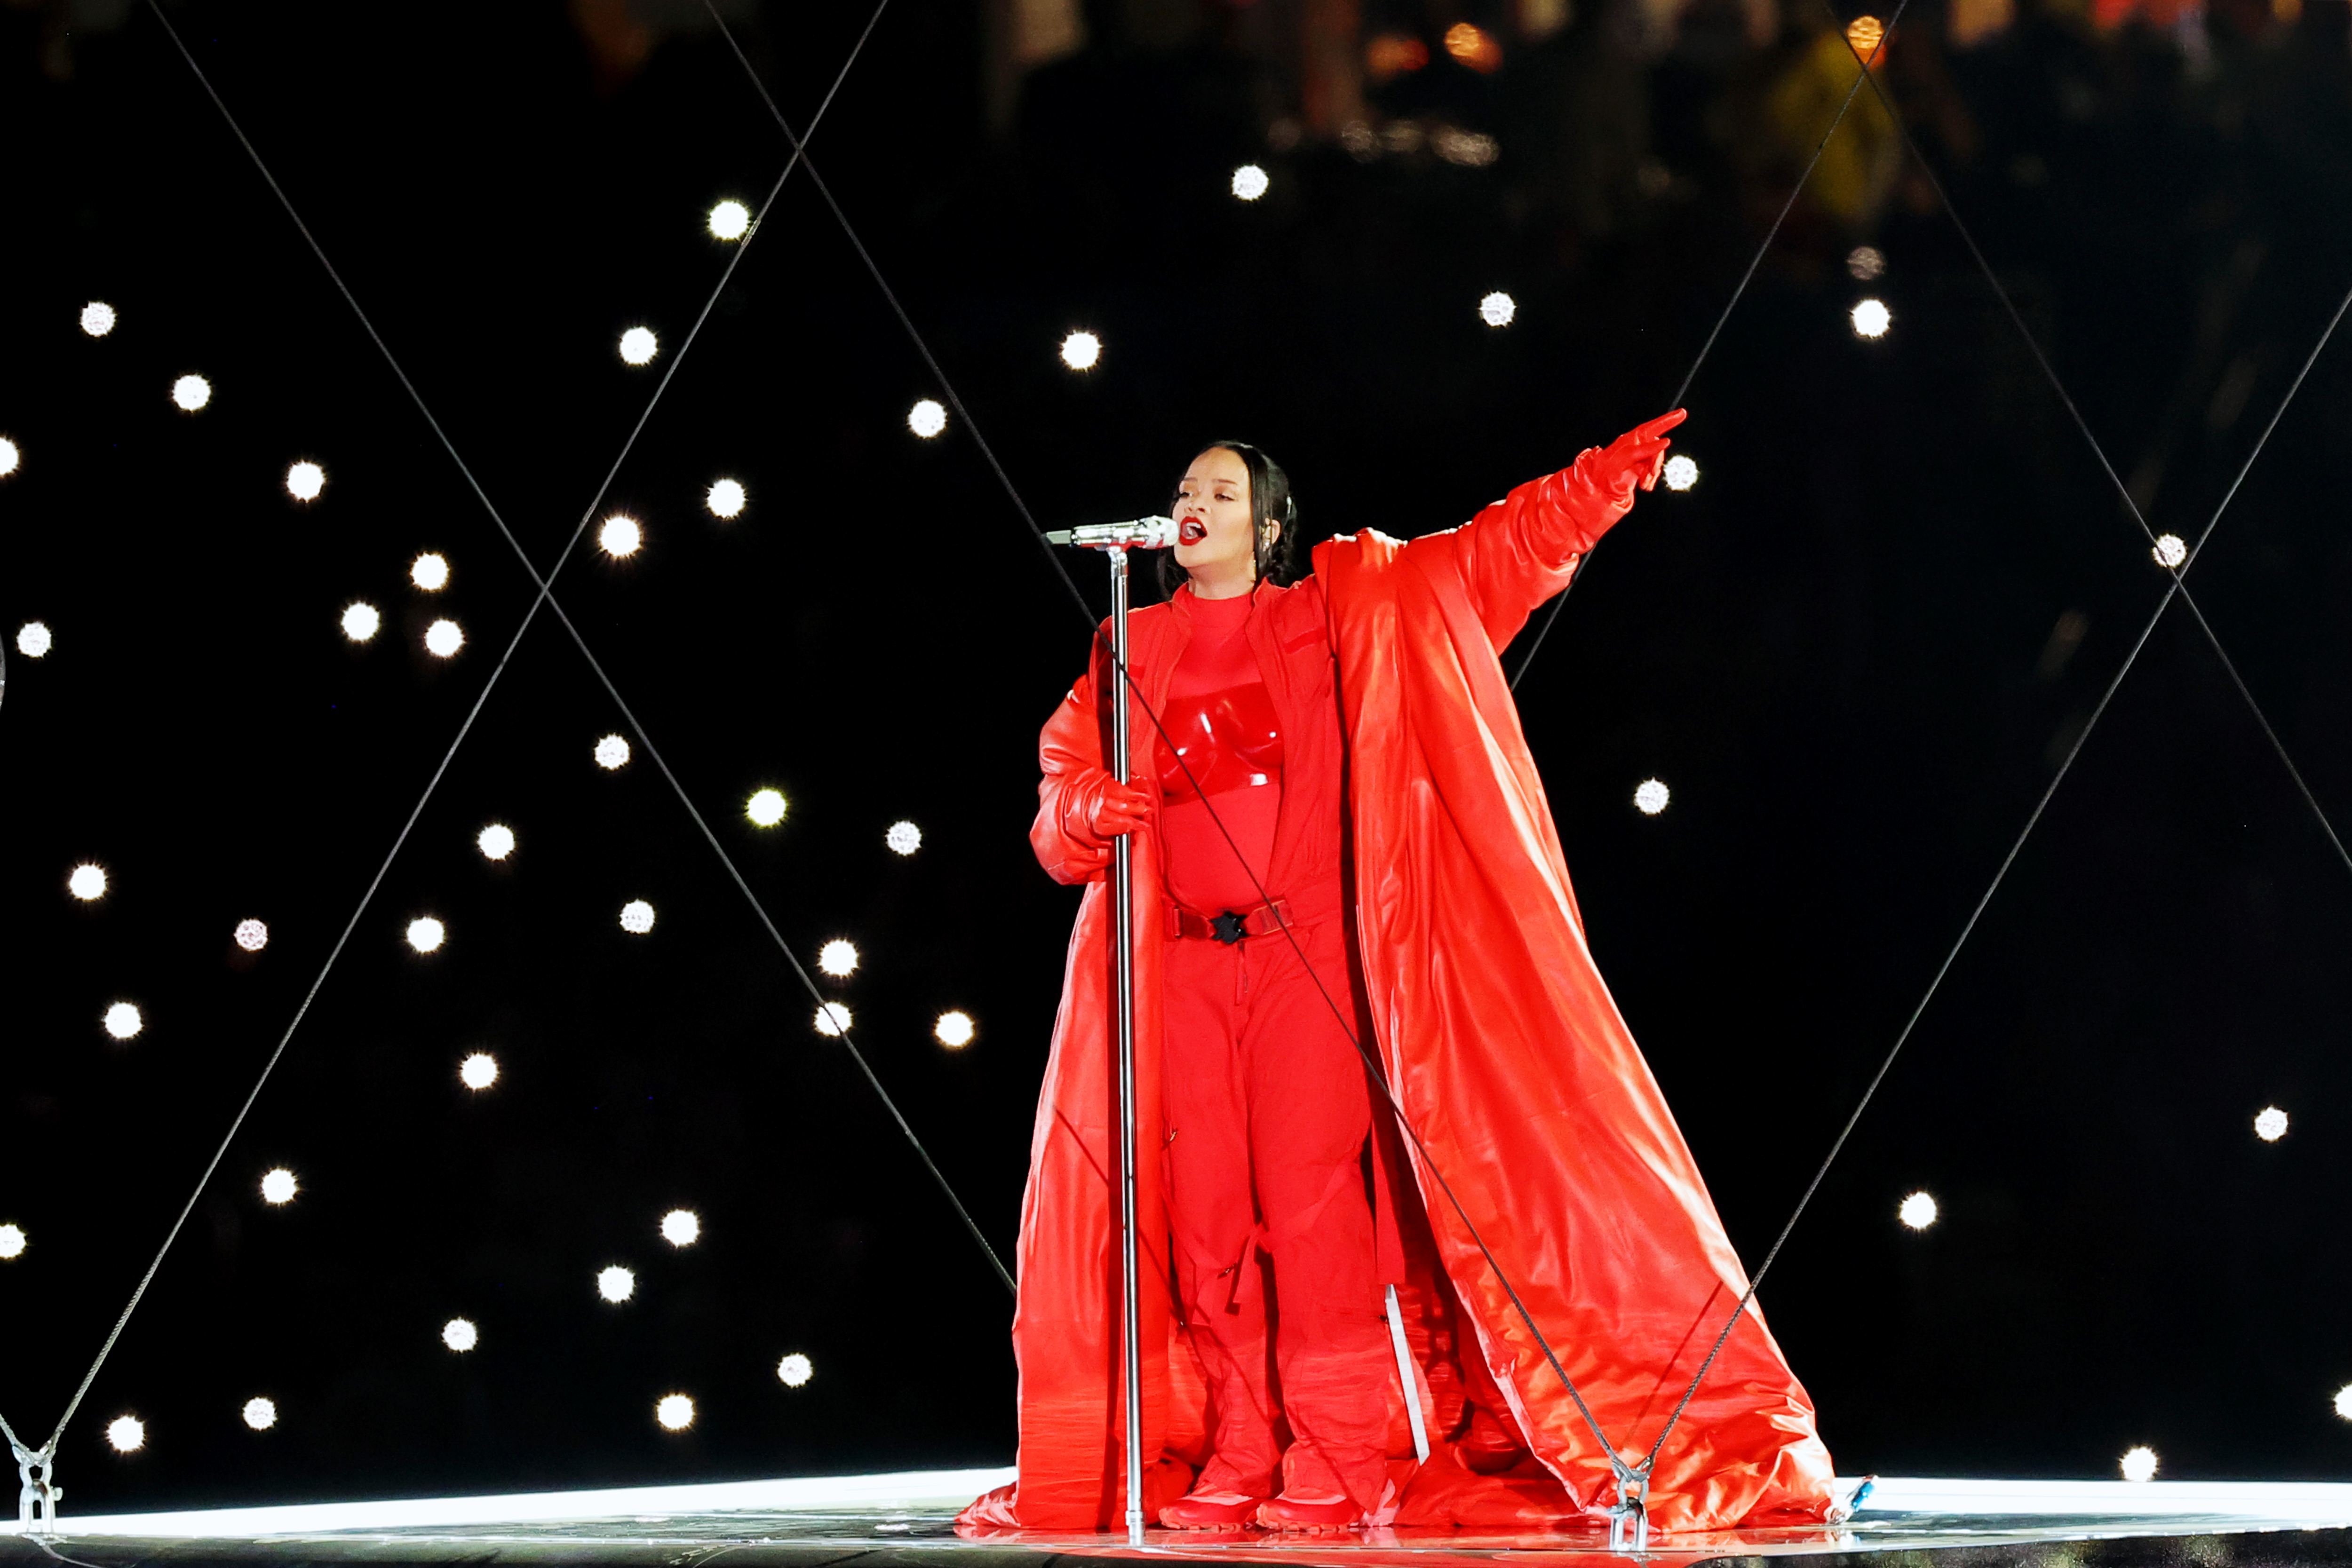 Super Bowl halftime show performer fashion and style - photos